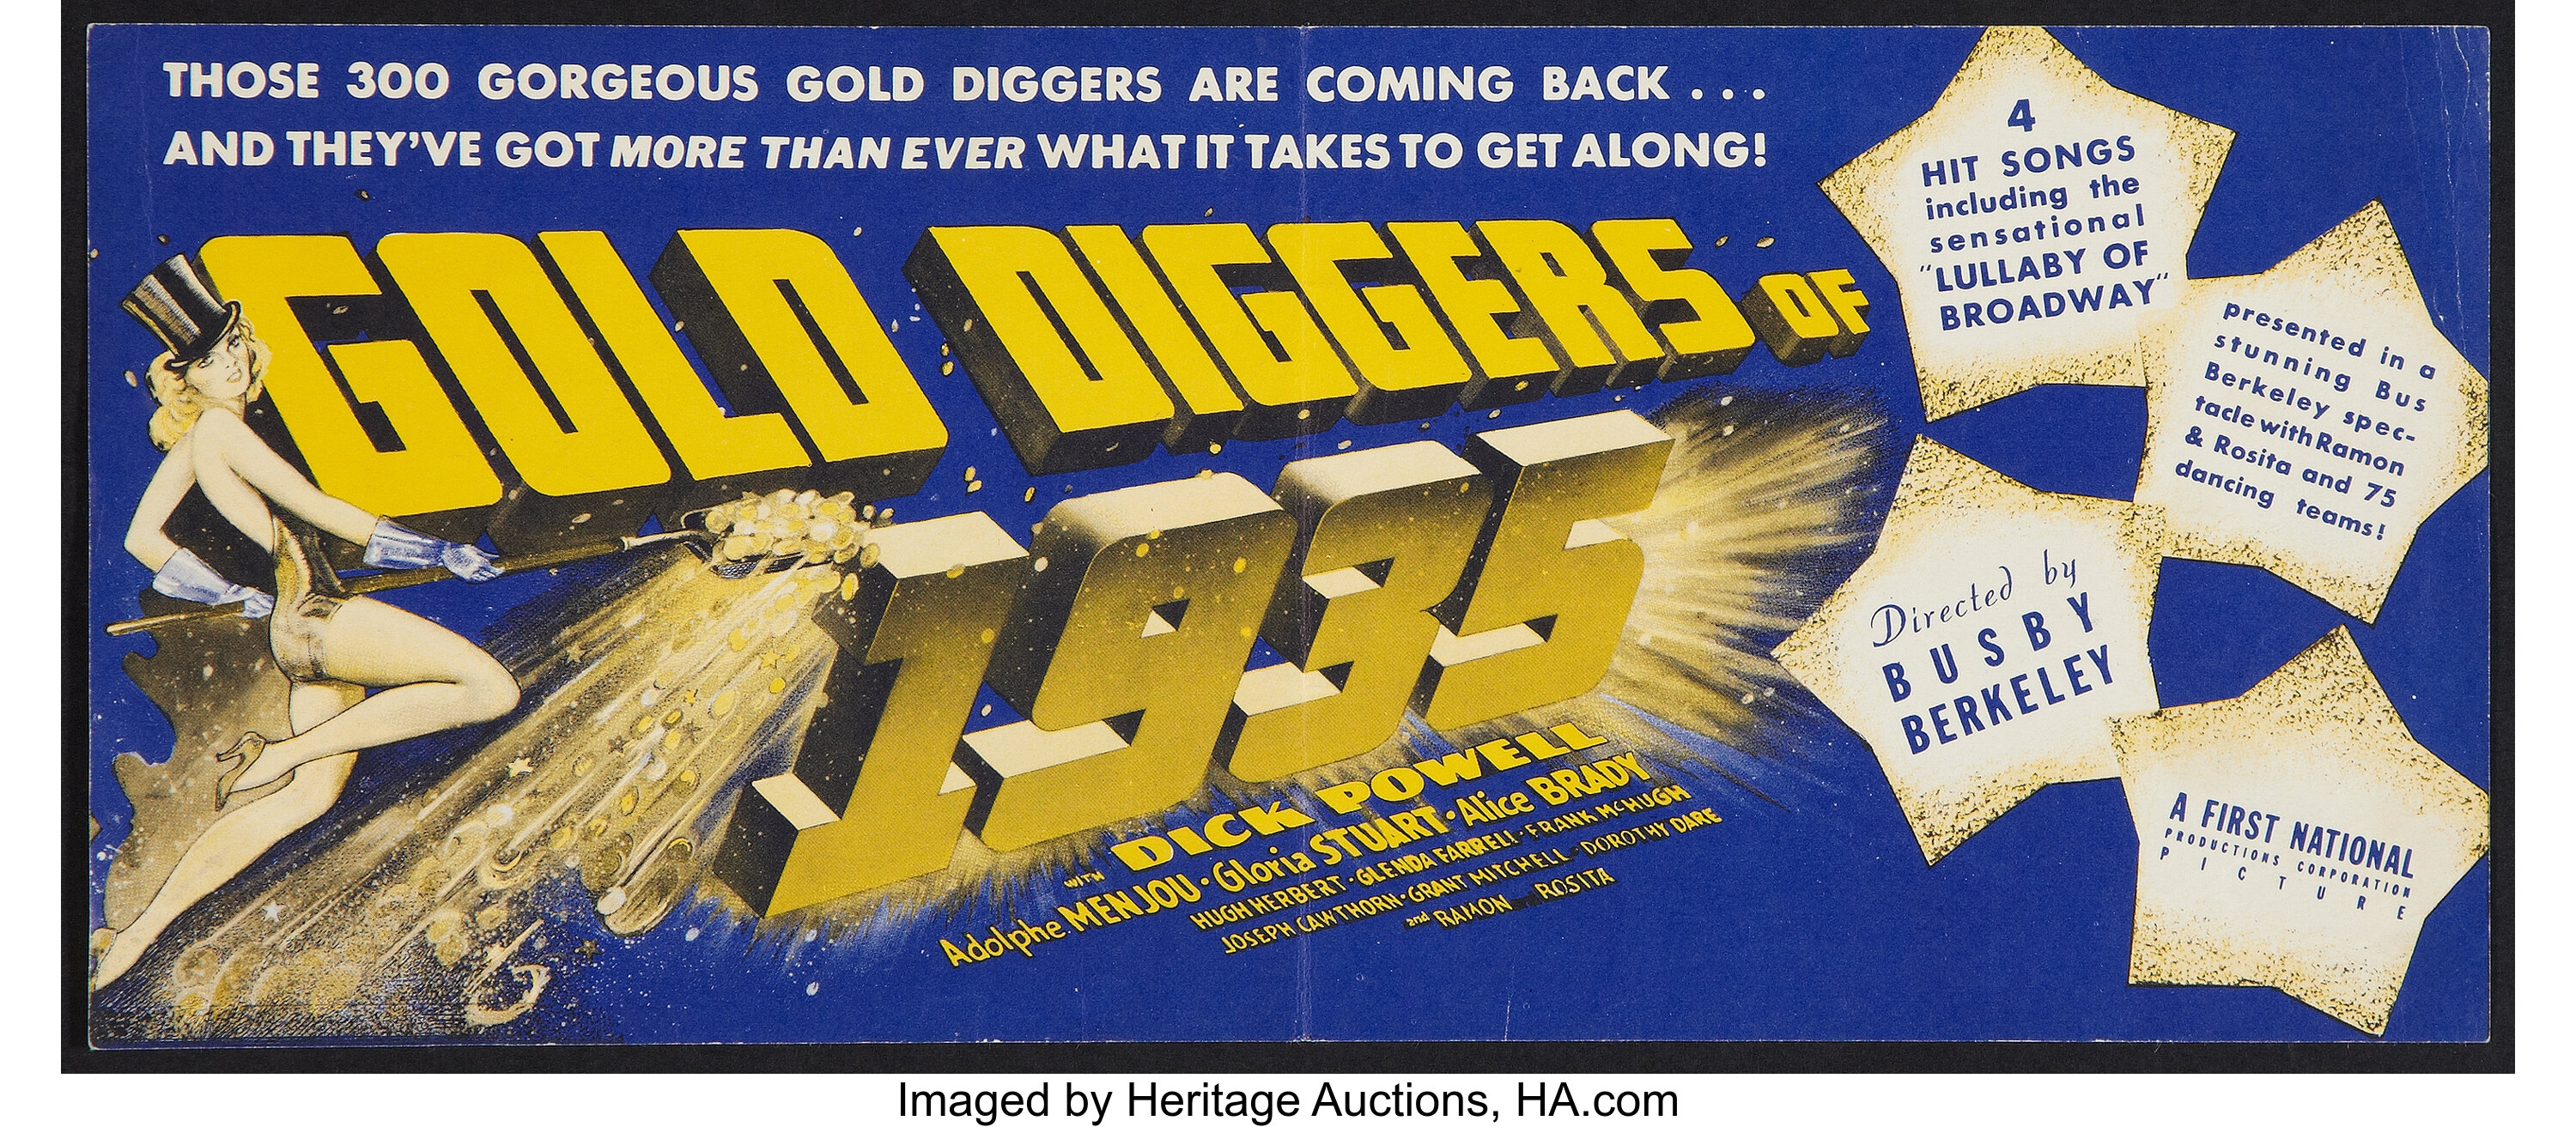 Lullaby of Broadway (From Gold Diggers of 1935) – Song by